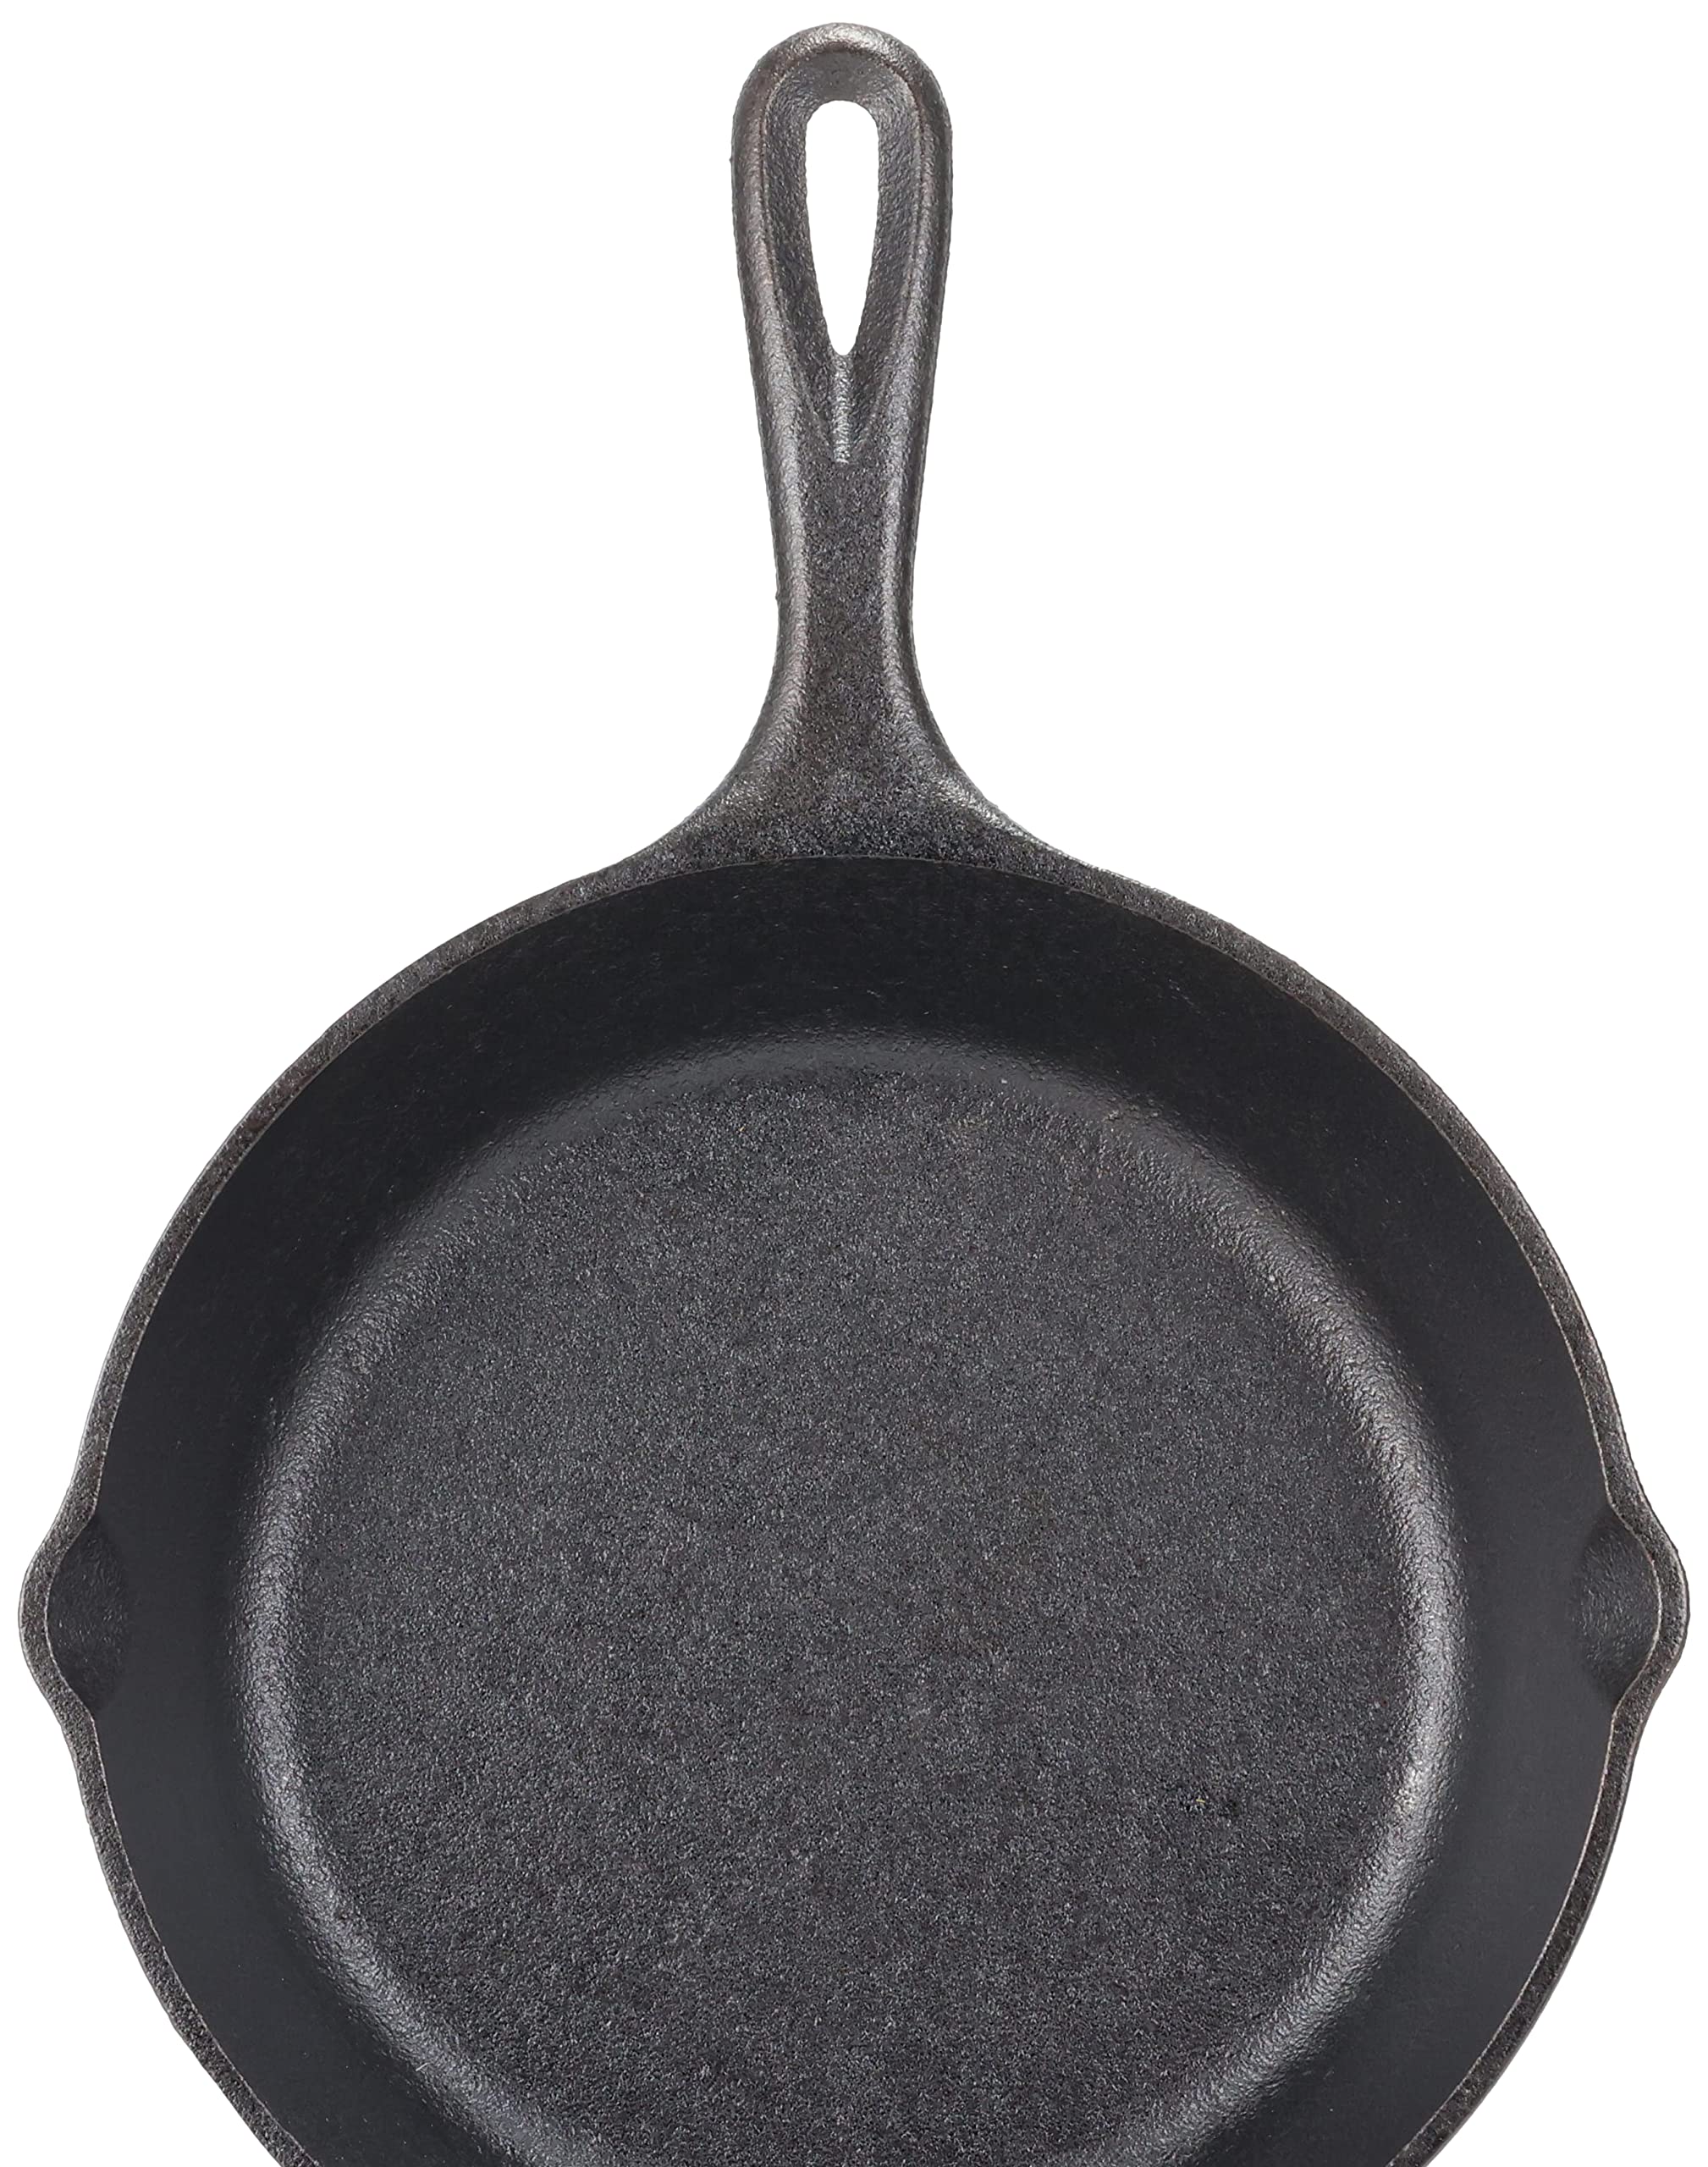 8" Lodge Pre-Seasoned Cast-Iron Skillet $14.90, 10.25" Skillet $19.90, 10.25" Cast Iron Dual Handle Pan $19.90 + Free Shipping w/ Prime or on $35+